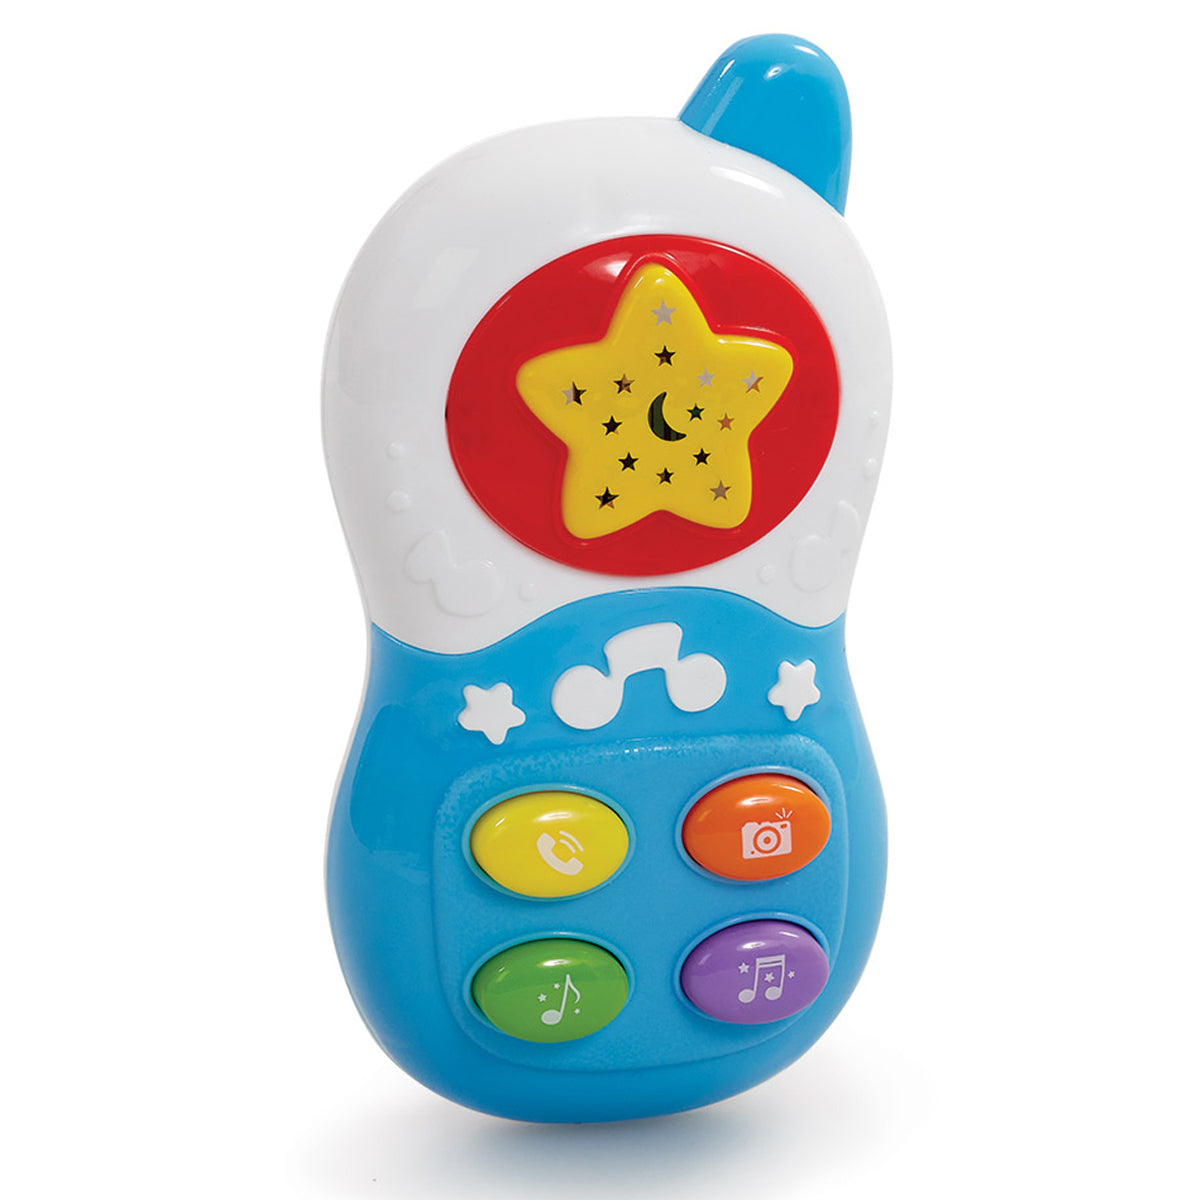 Little Lot Baby's First Phone (Styles Vary)